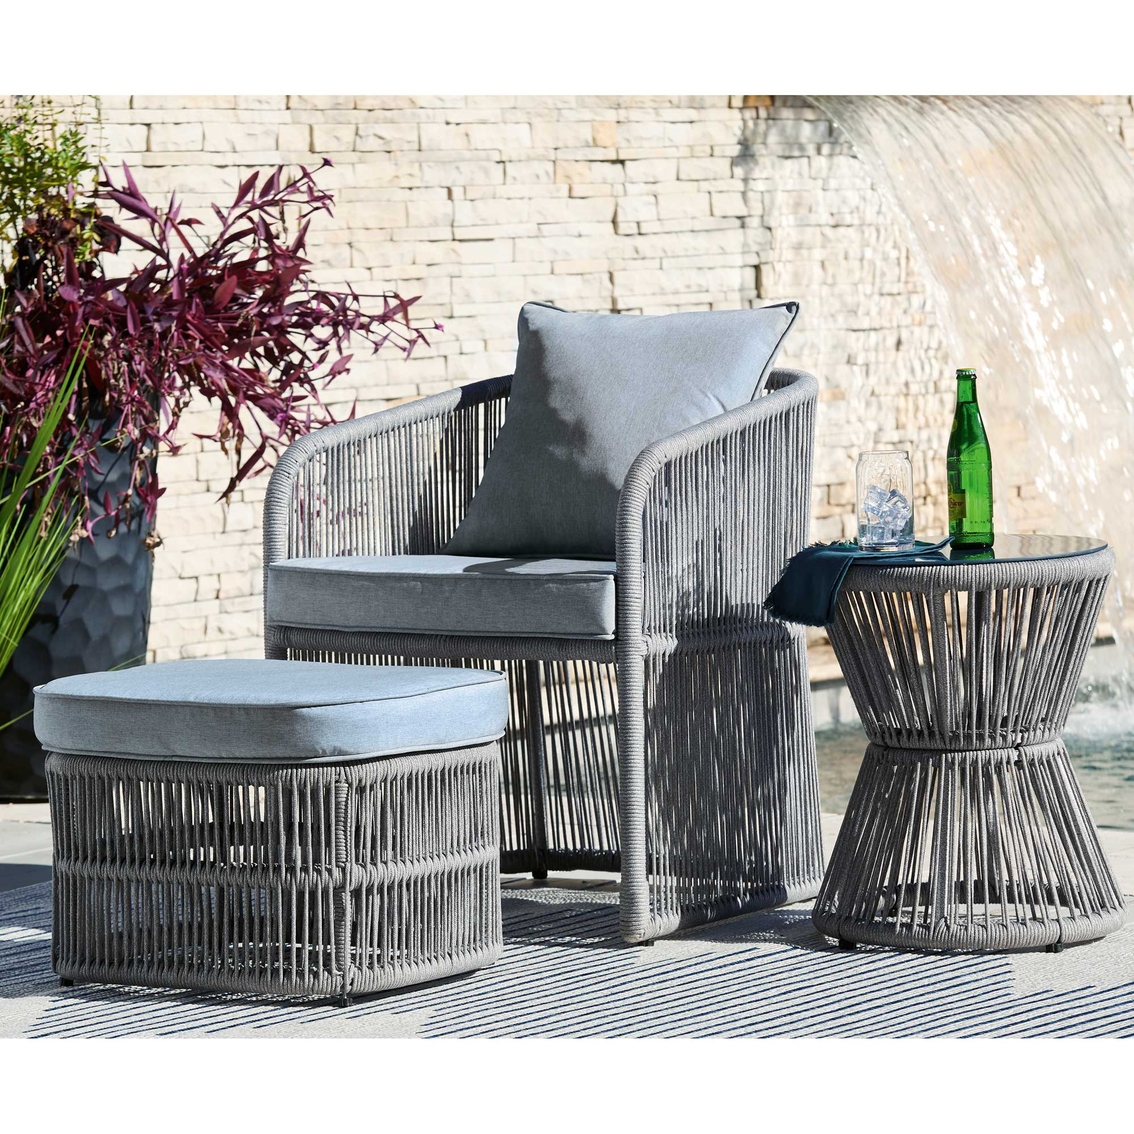 Signature Design by Ashley Coast Island Outdoor Chair with Ottoman and Side Table - Image 3 of 5